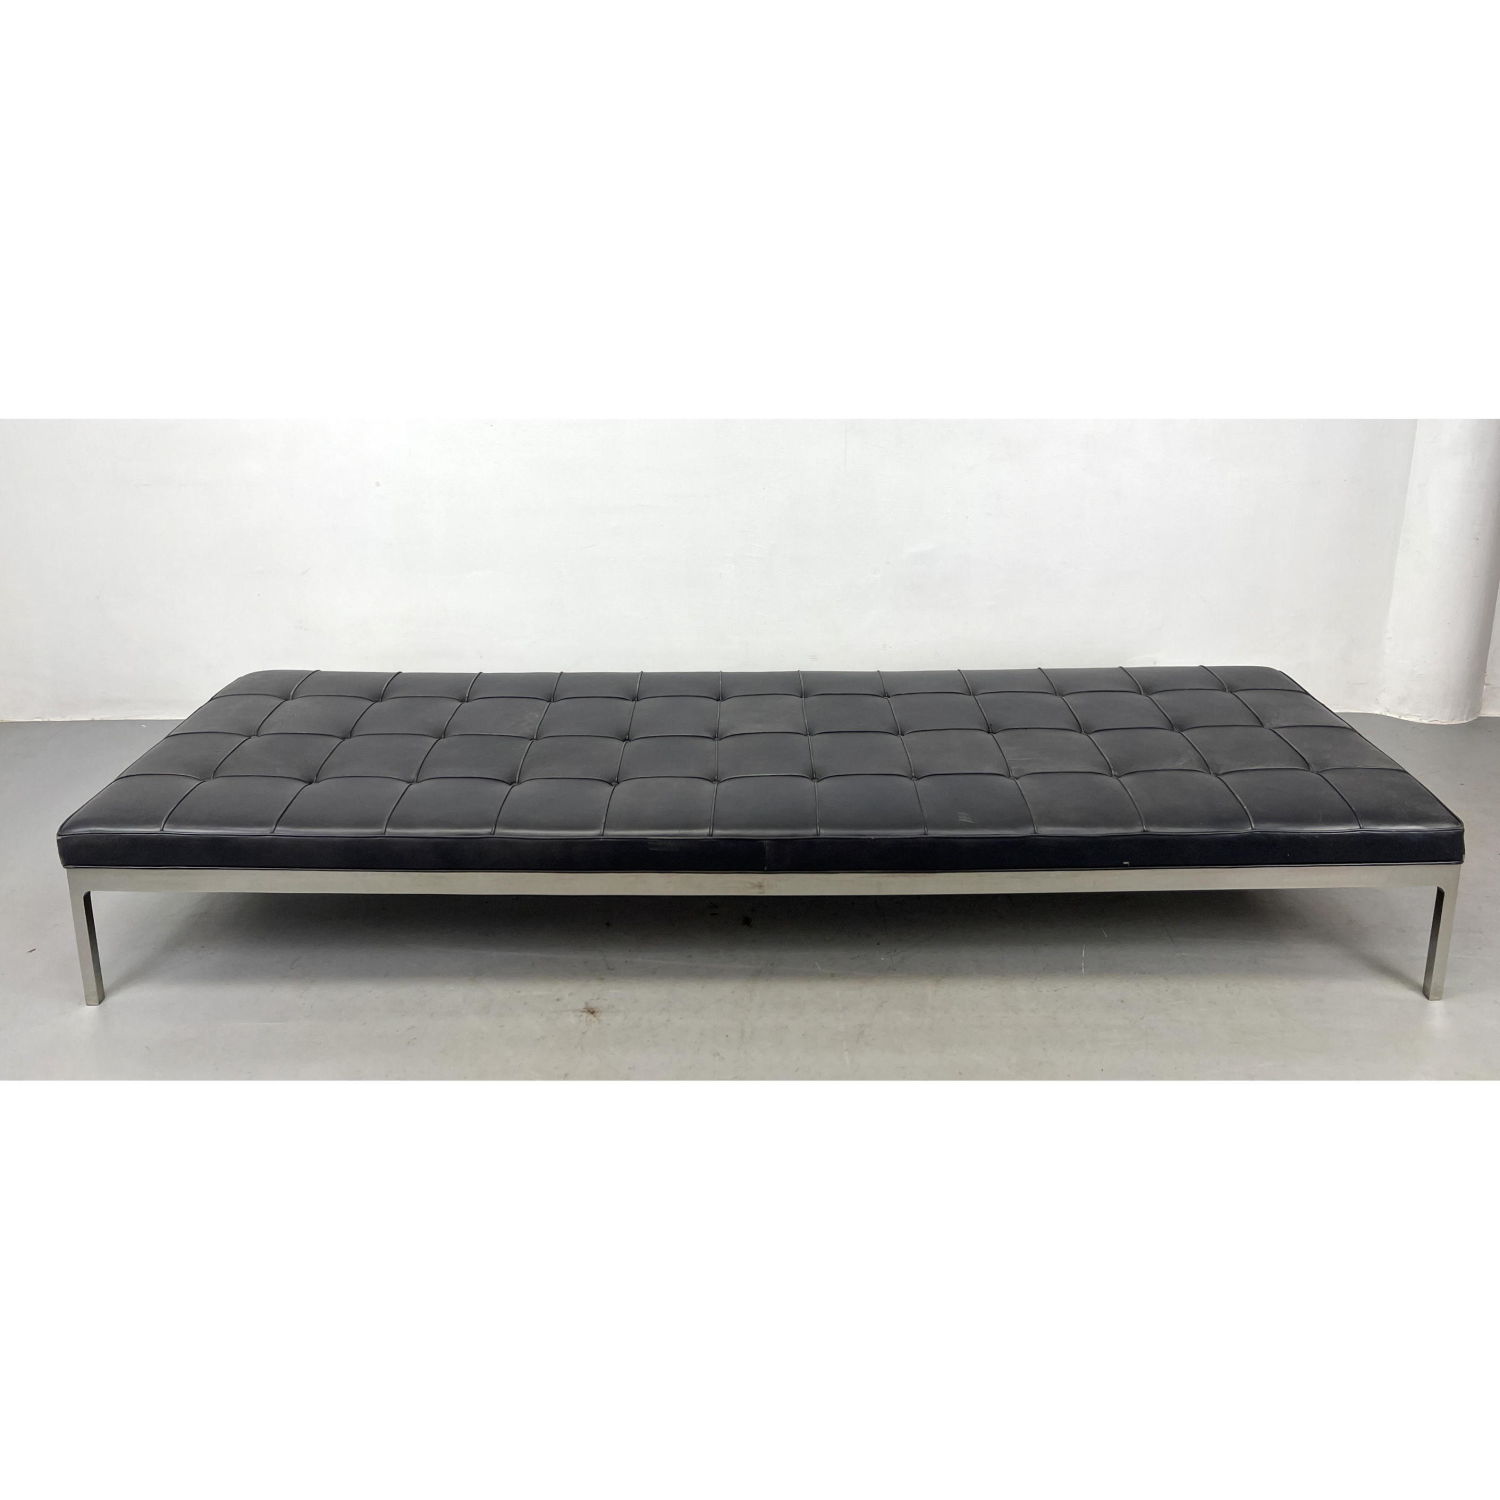 Large Nicos Zographos Leather Daybed 2ff36b